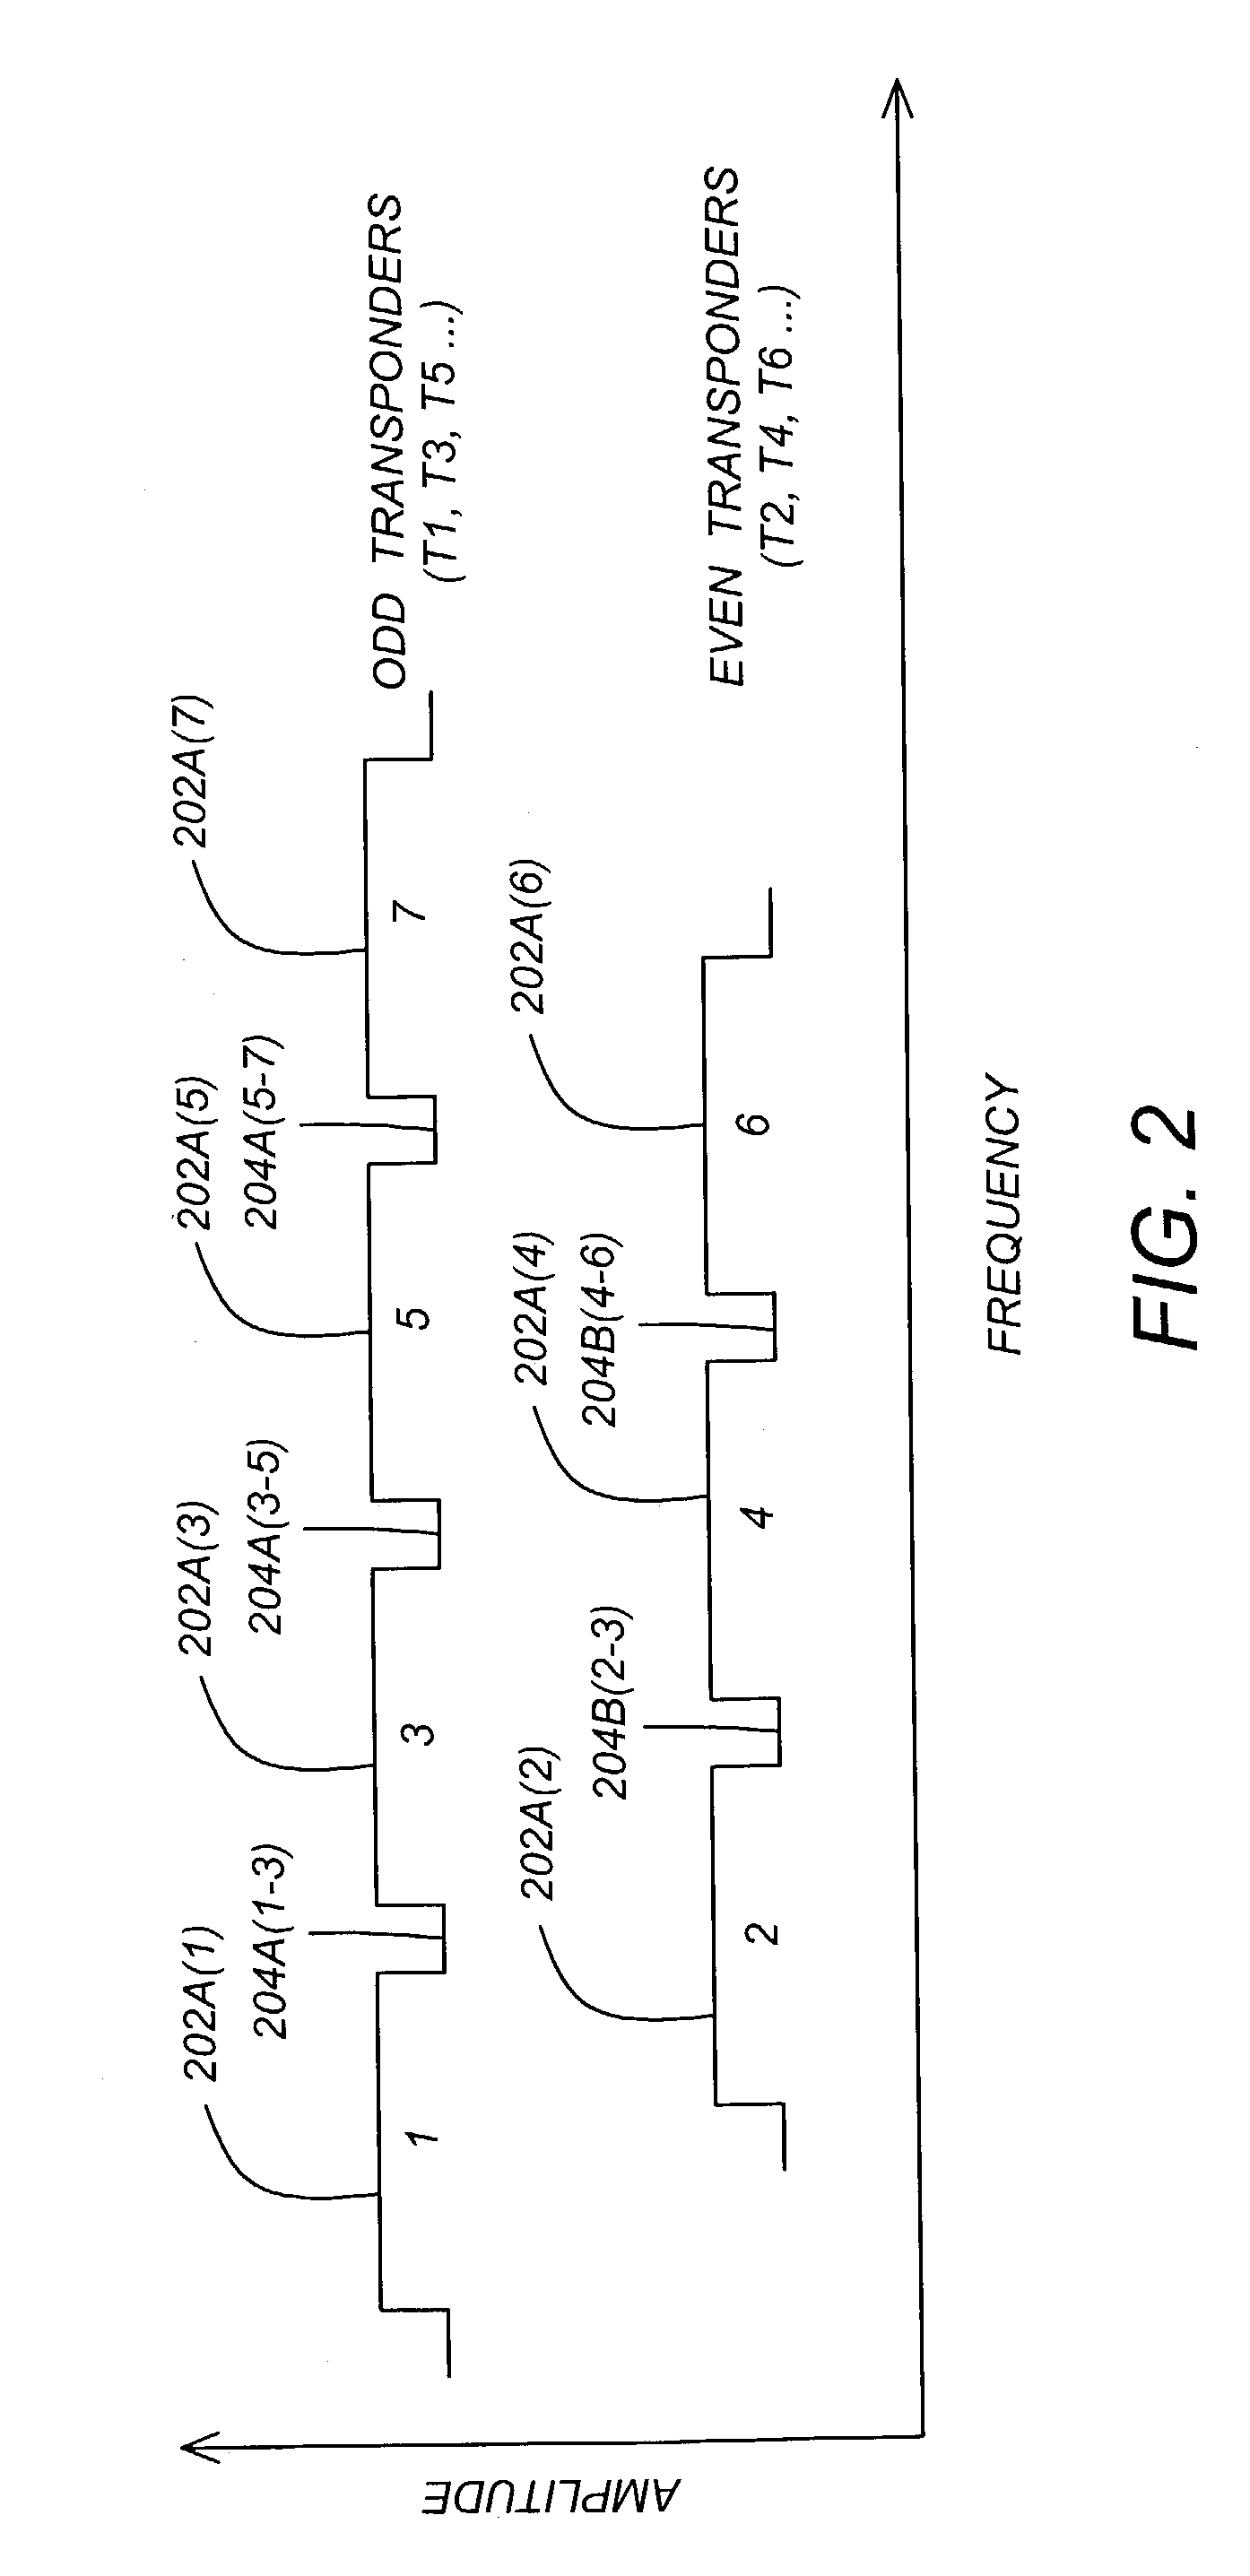 Method and apparatus for reducing interference between terrestrially-based and space-based broadcast systems